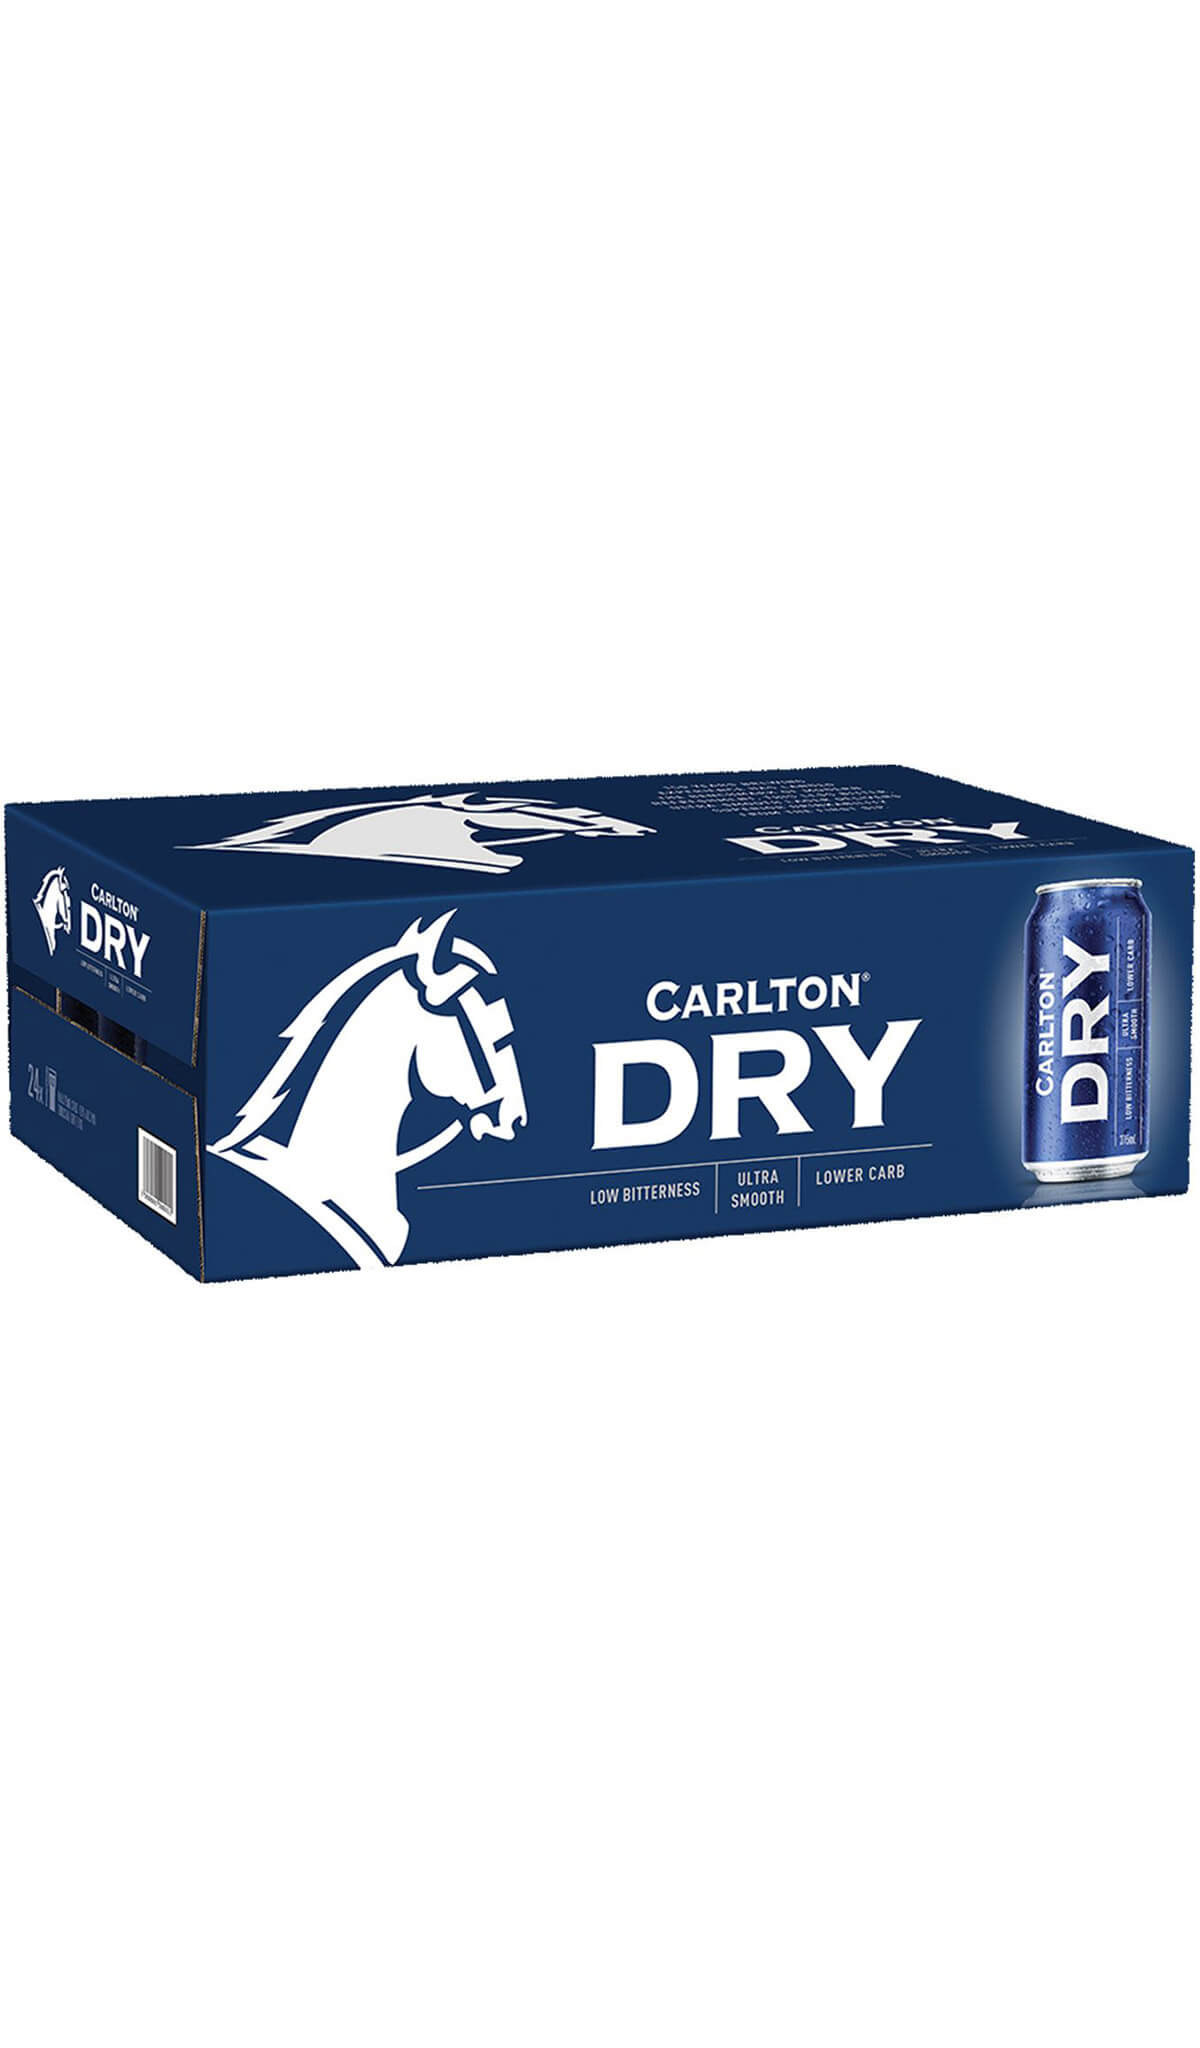 Find out more, explore the range and purchase Carlton Dry 24-pack cans slab at Wine Sellers Direct - Australia's independent liquor specialists.